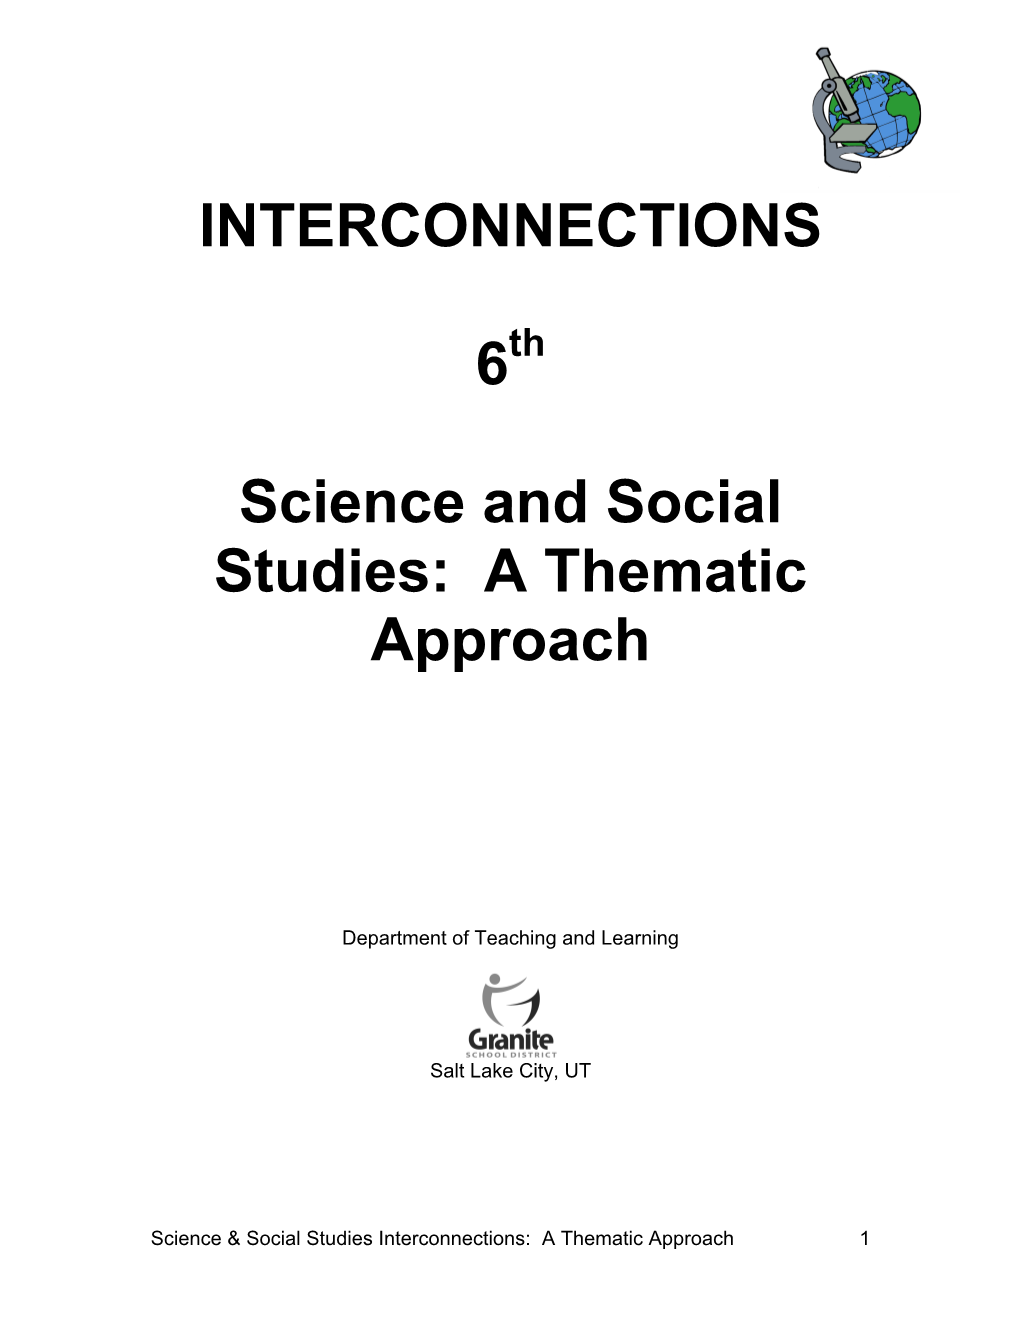 INTERCONNECTIONS 6 Science and Social Studies: a Thematic Approach